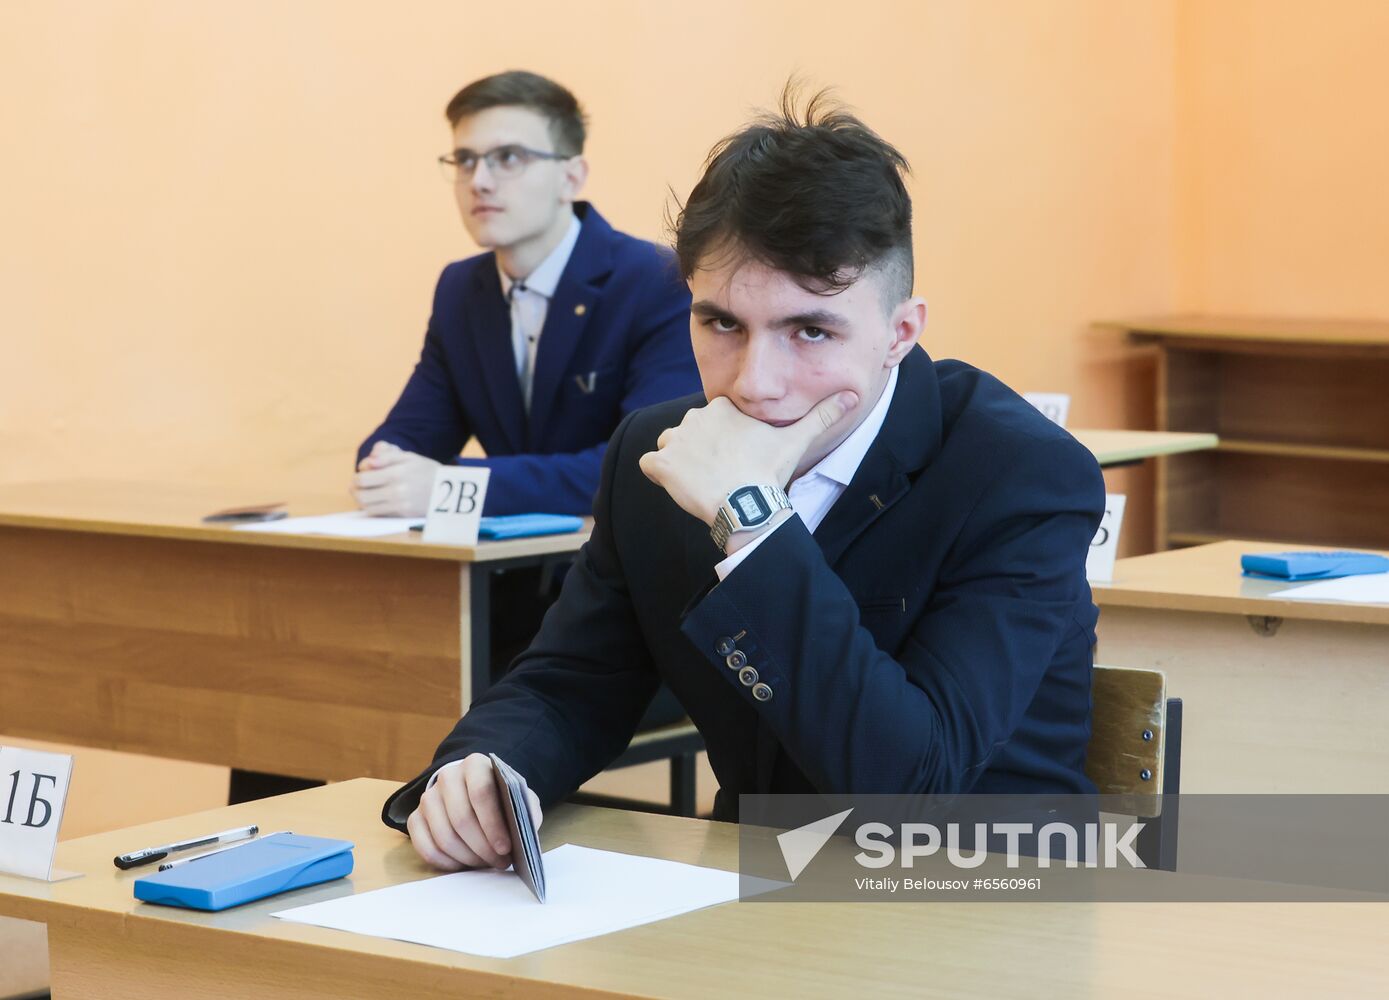 Russia Unified State Exam